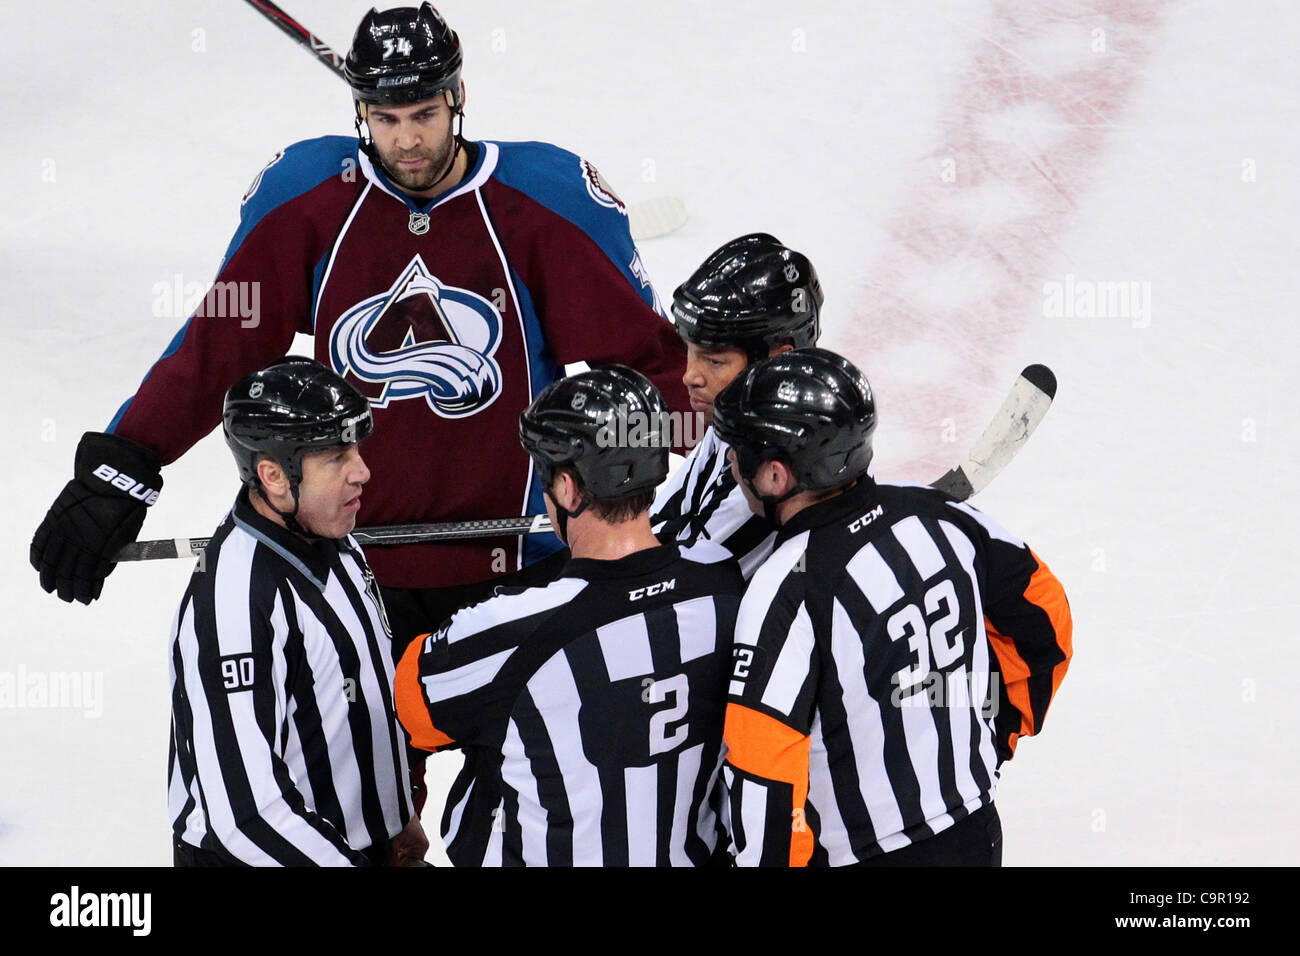 Feb. 10, 2012 - Denver, Colorado, United States - Colorado Avalanche left wing Daniel Winnik (34) listens in as linesman Andy McElman (90) talks with referee Tom Kowal (32) in the first period. After one period Carolina leads 2-1. The Colorado Avalanche hosted the Carolina Hurricanes at the Pepsi Ce Stock Photo